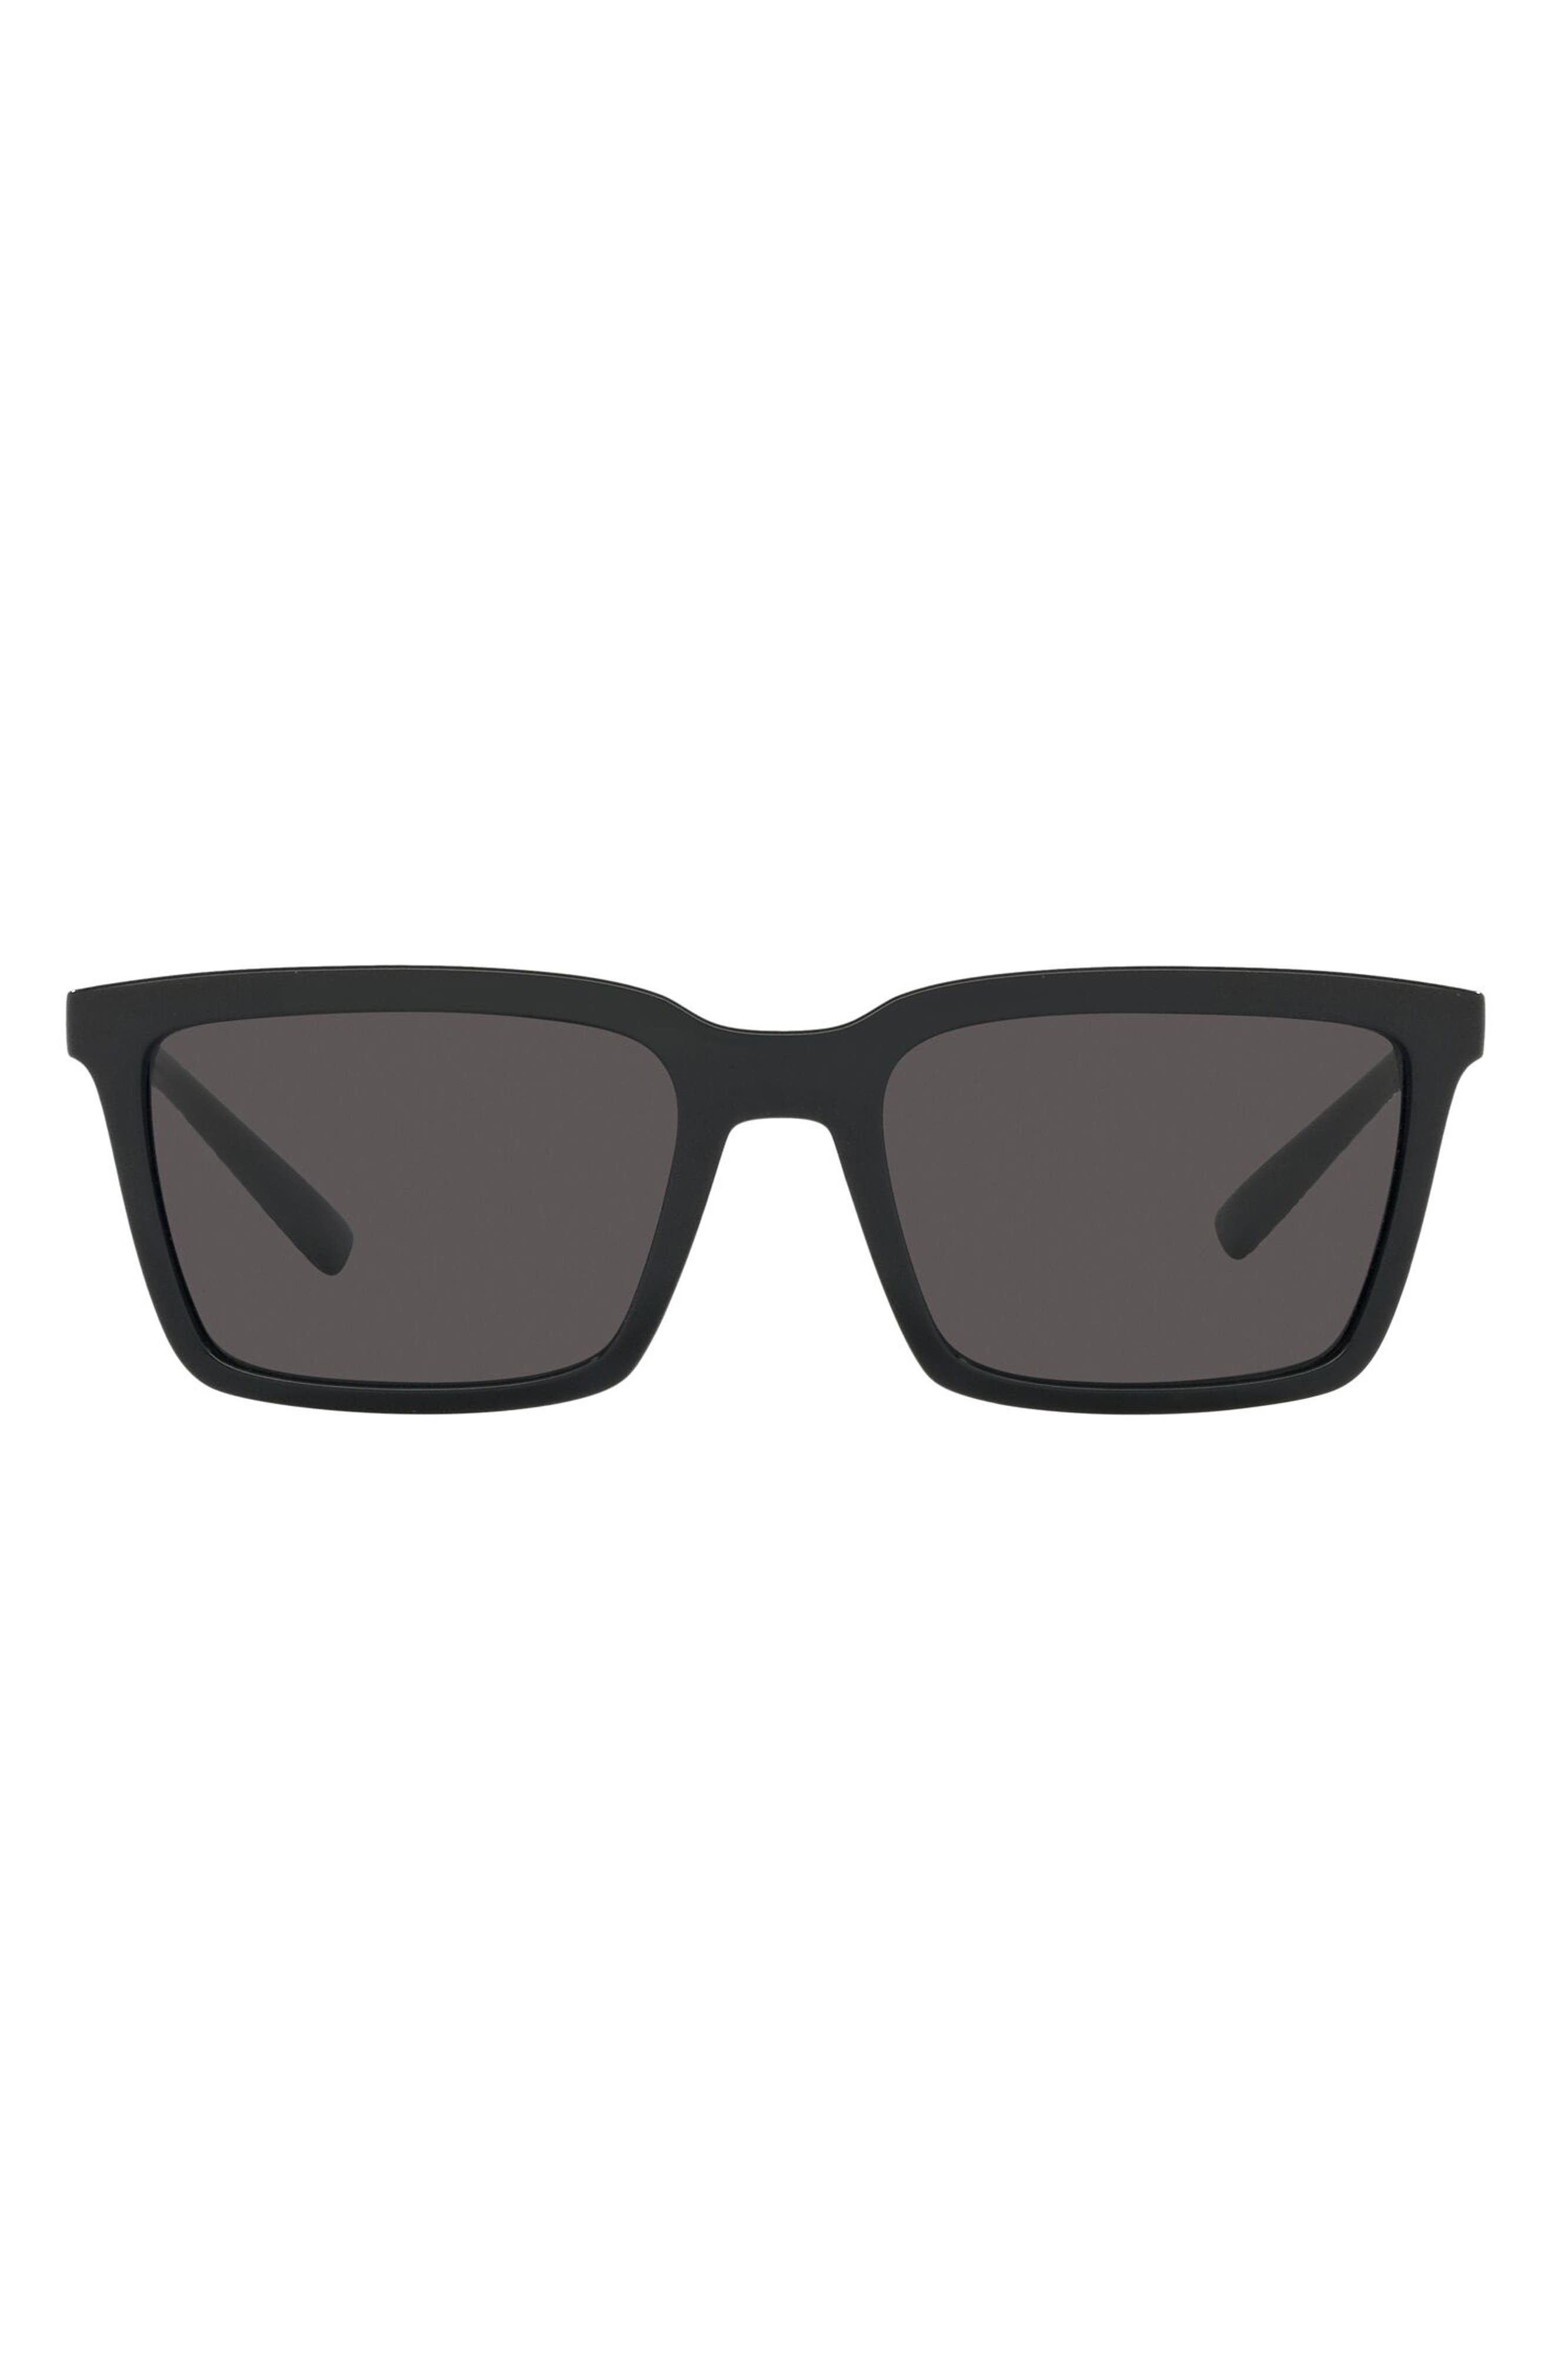 Dolce & Gabbana 55mm Rectangle Sunglasses in Rubber Grey at Nordstrom